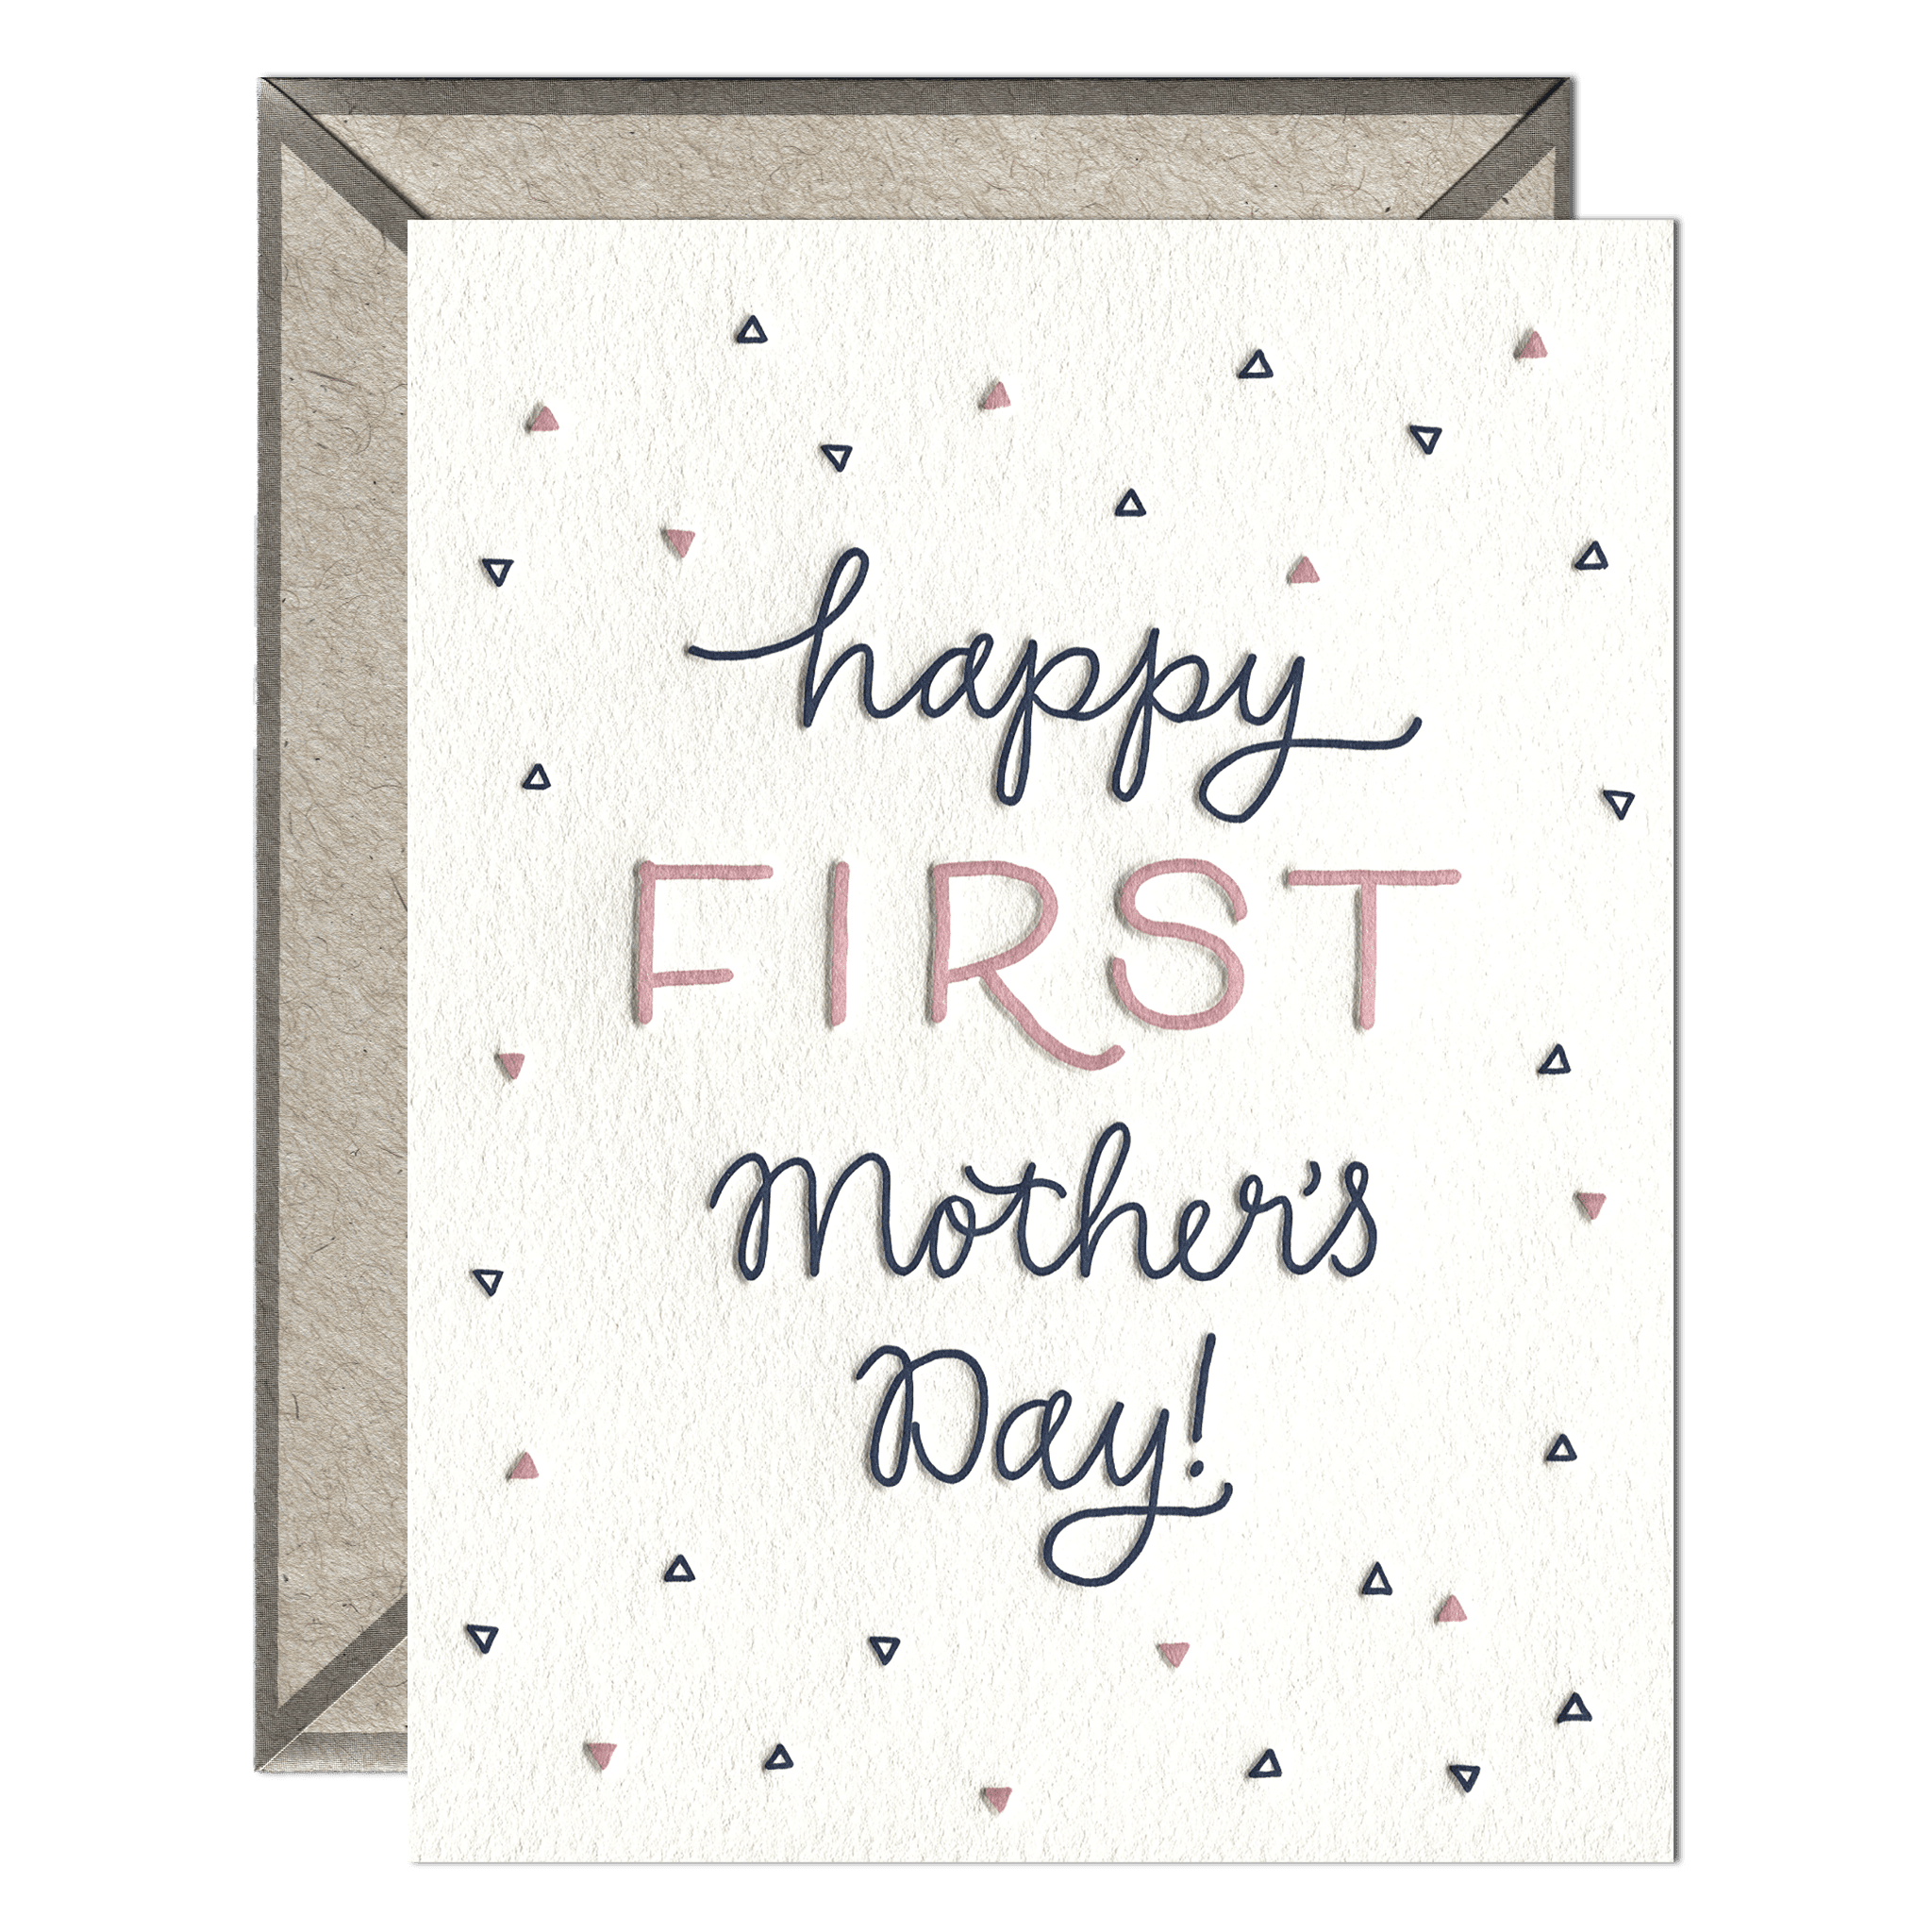 First Mother's Day, Happy 1st Mothers Day